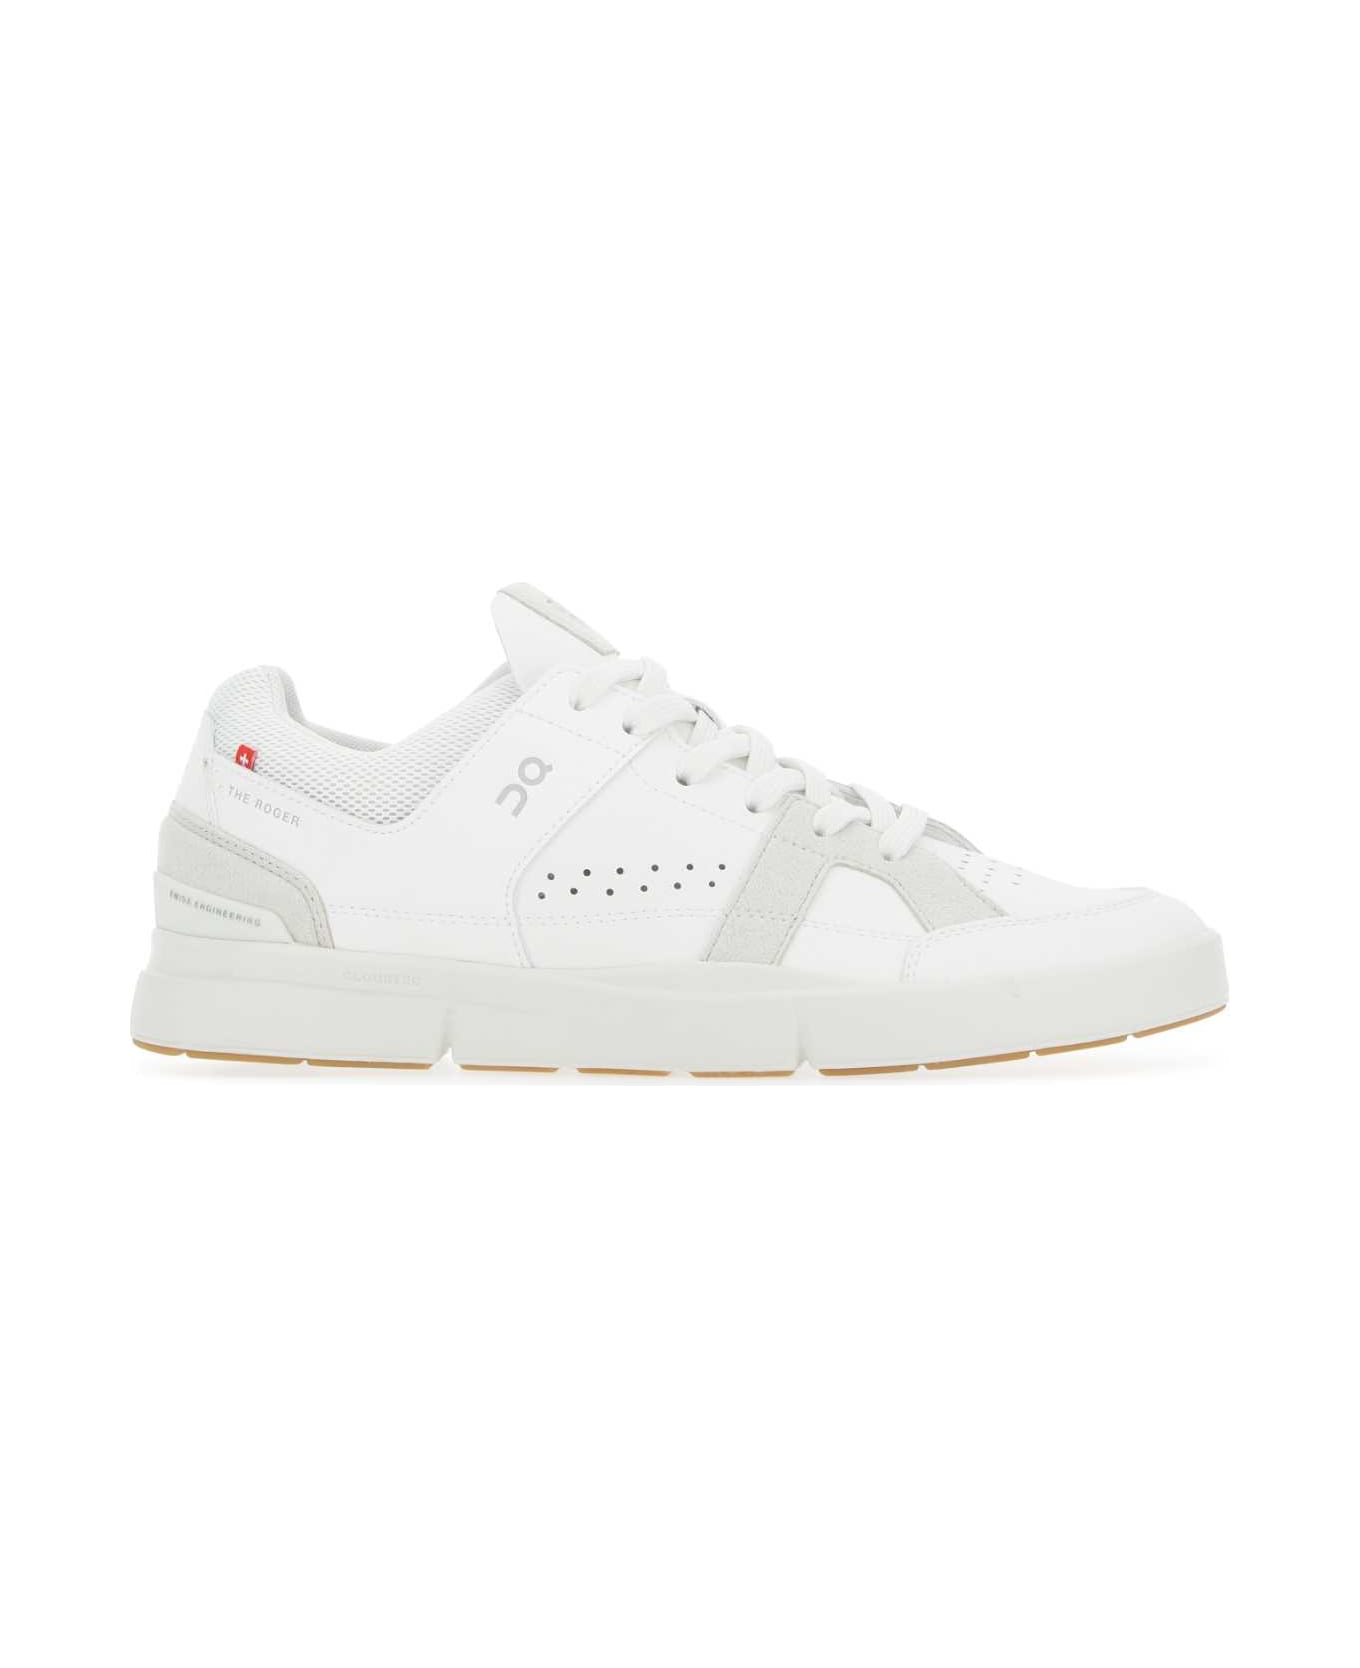 ON White Synthetic Leather And Fabric The Roger Clubhouse Sneakers - WHITESAND